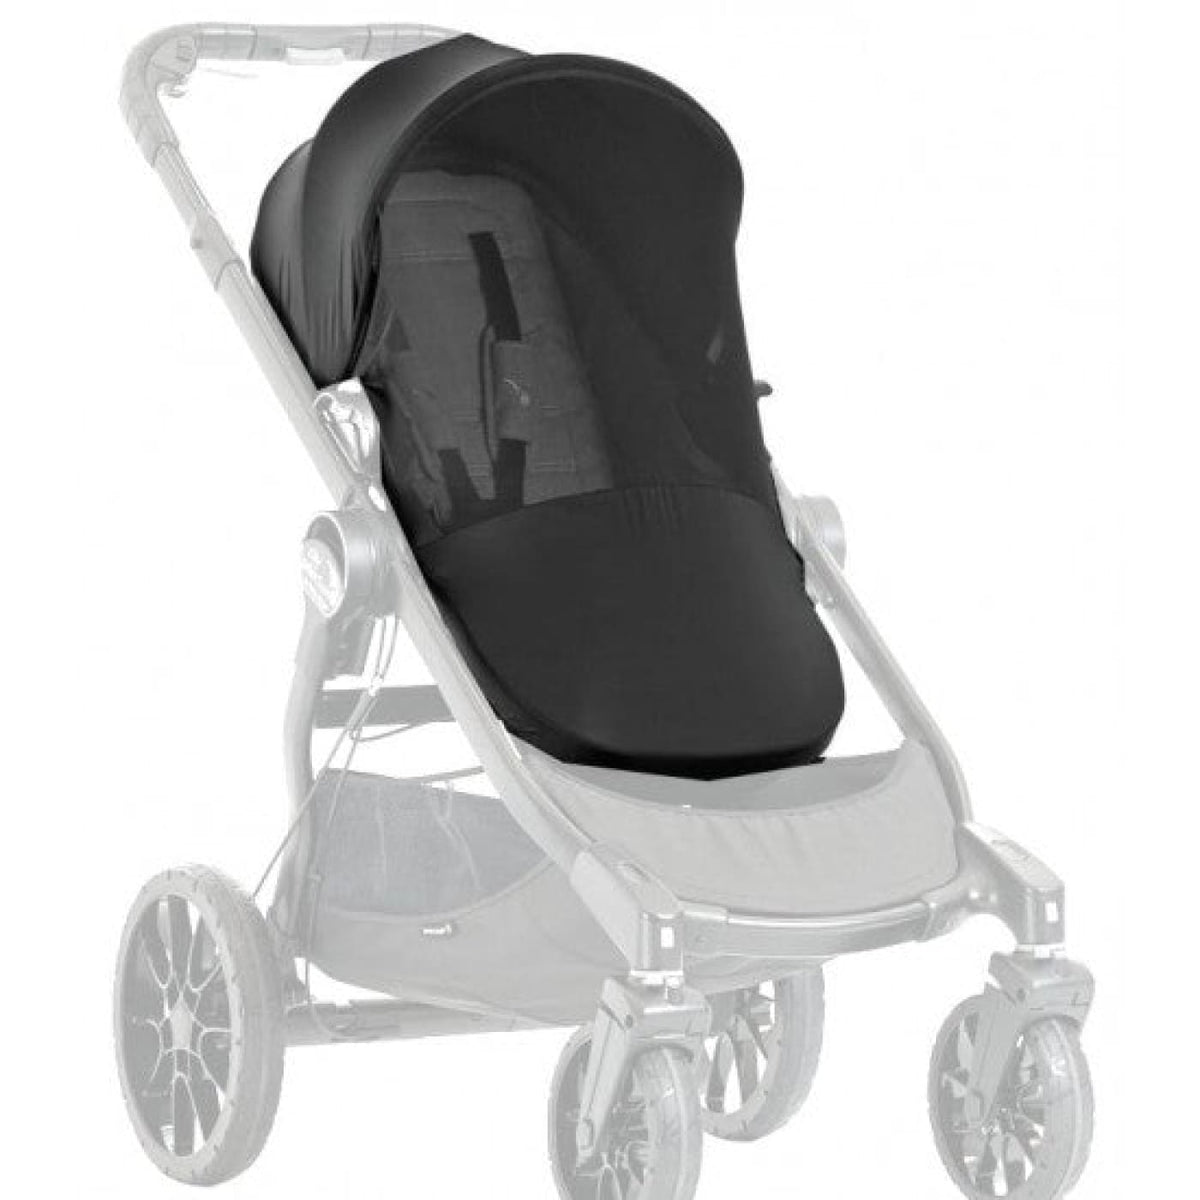 Baby Jogger City Select / City Select 2 / Select Lux Bug Cover - PRAMS &amp; STROLLERS - SUN COVERS/WEATHER SHIELDS